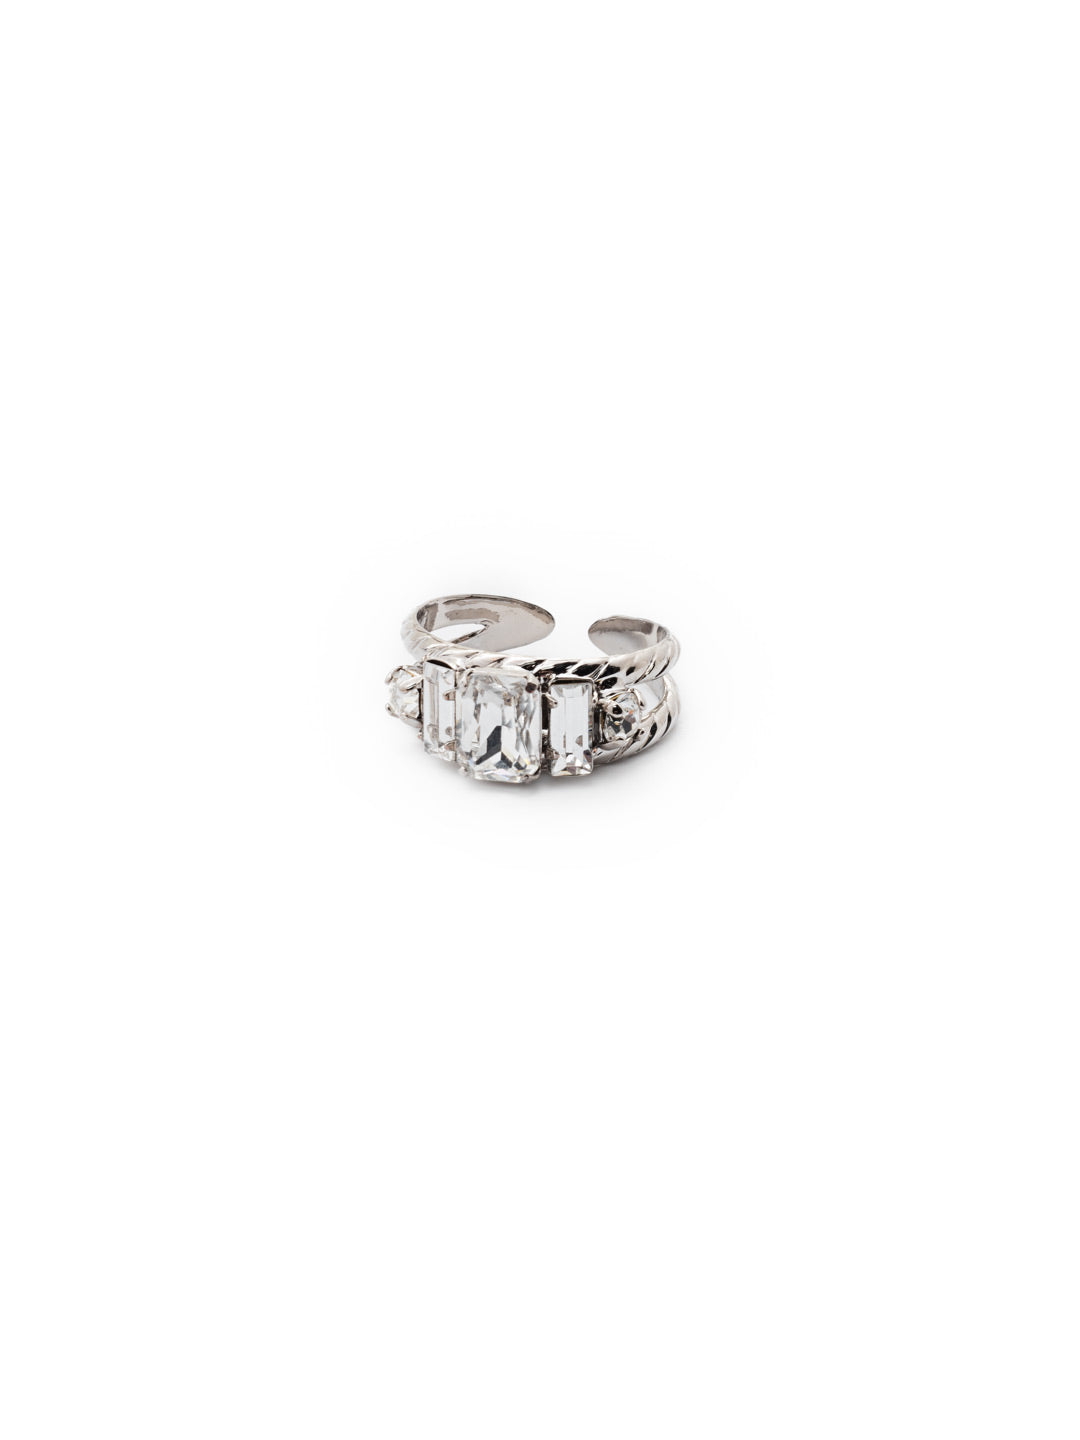 Petite Geo Band Ring - RDG78RHCRY - <p>Emerald-cut, baguette, and round crystals all sit in a row on this geometric ring. An easily adjustable double band features a decorative metal design From Sorrelli's Crystal collection in our Palladium Silver-tone finish.</p>